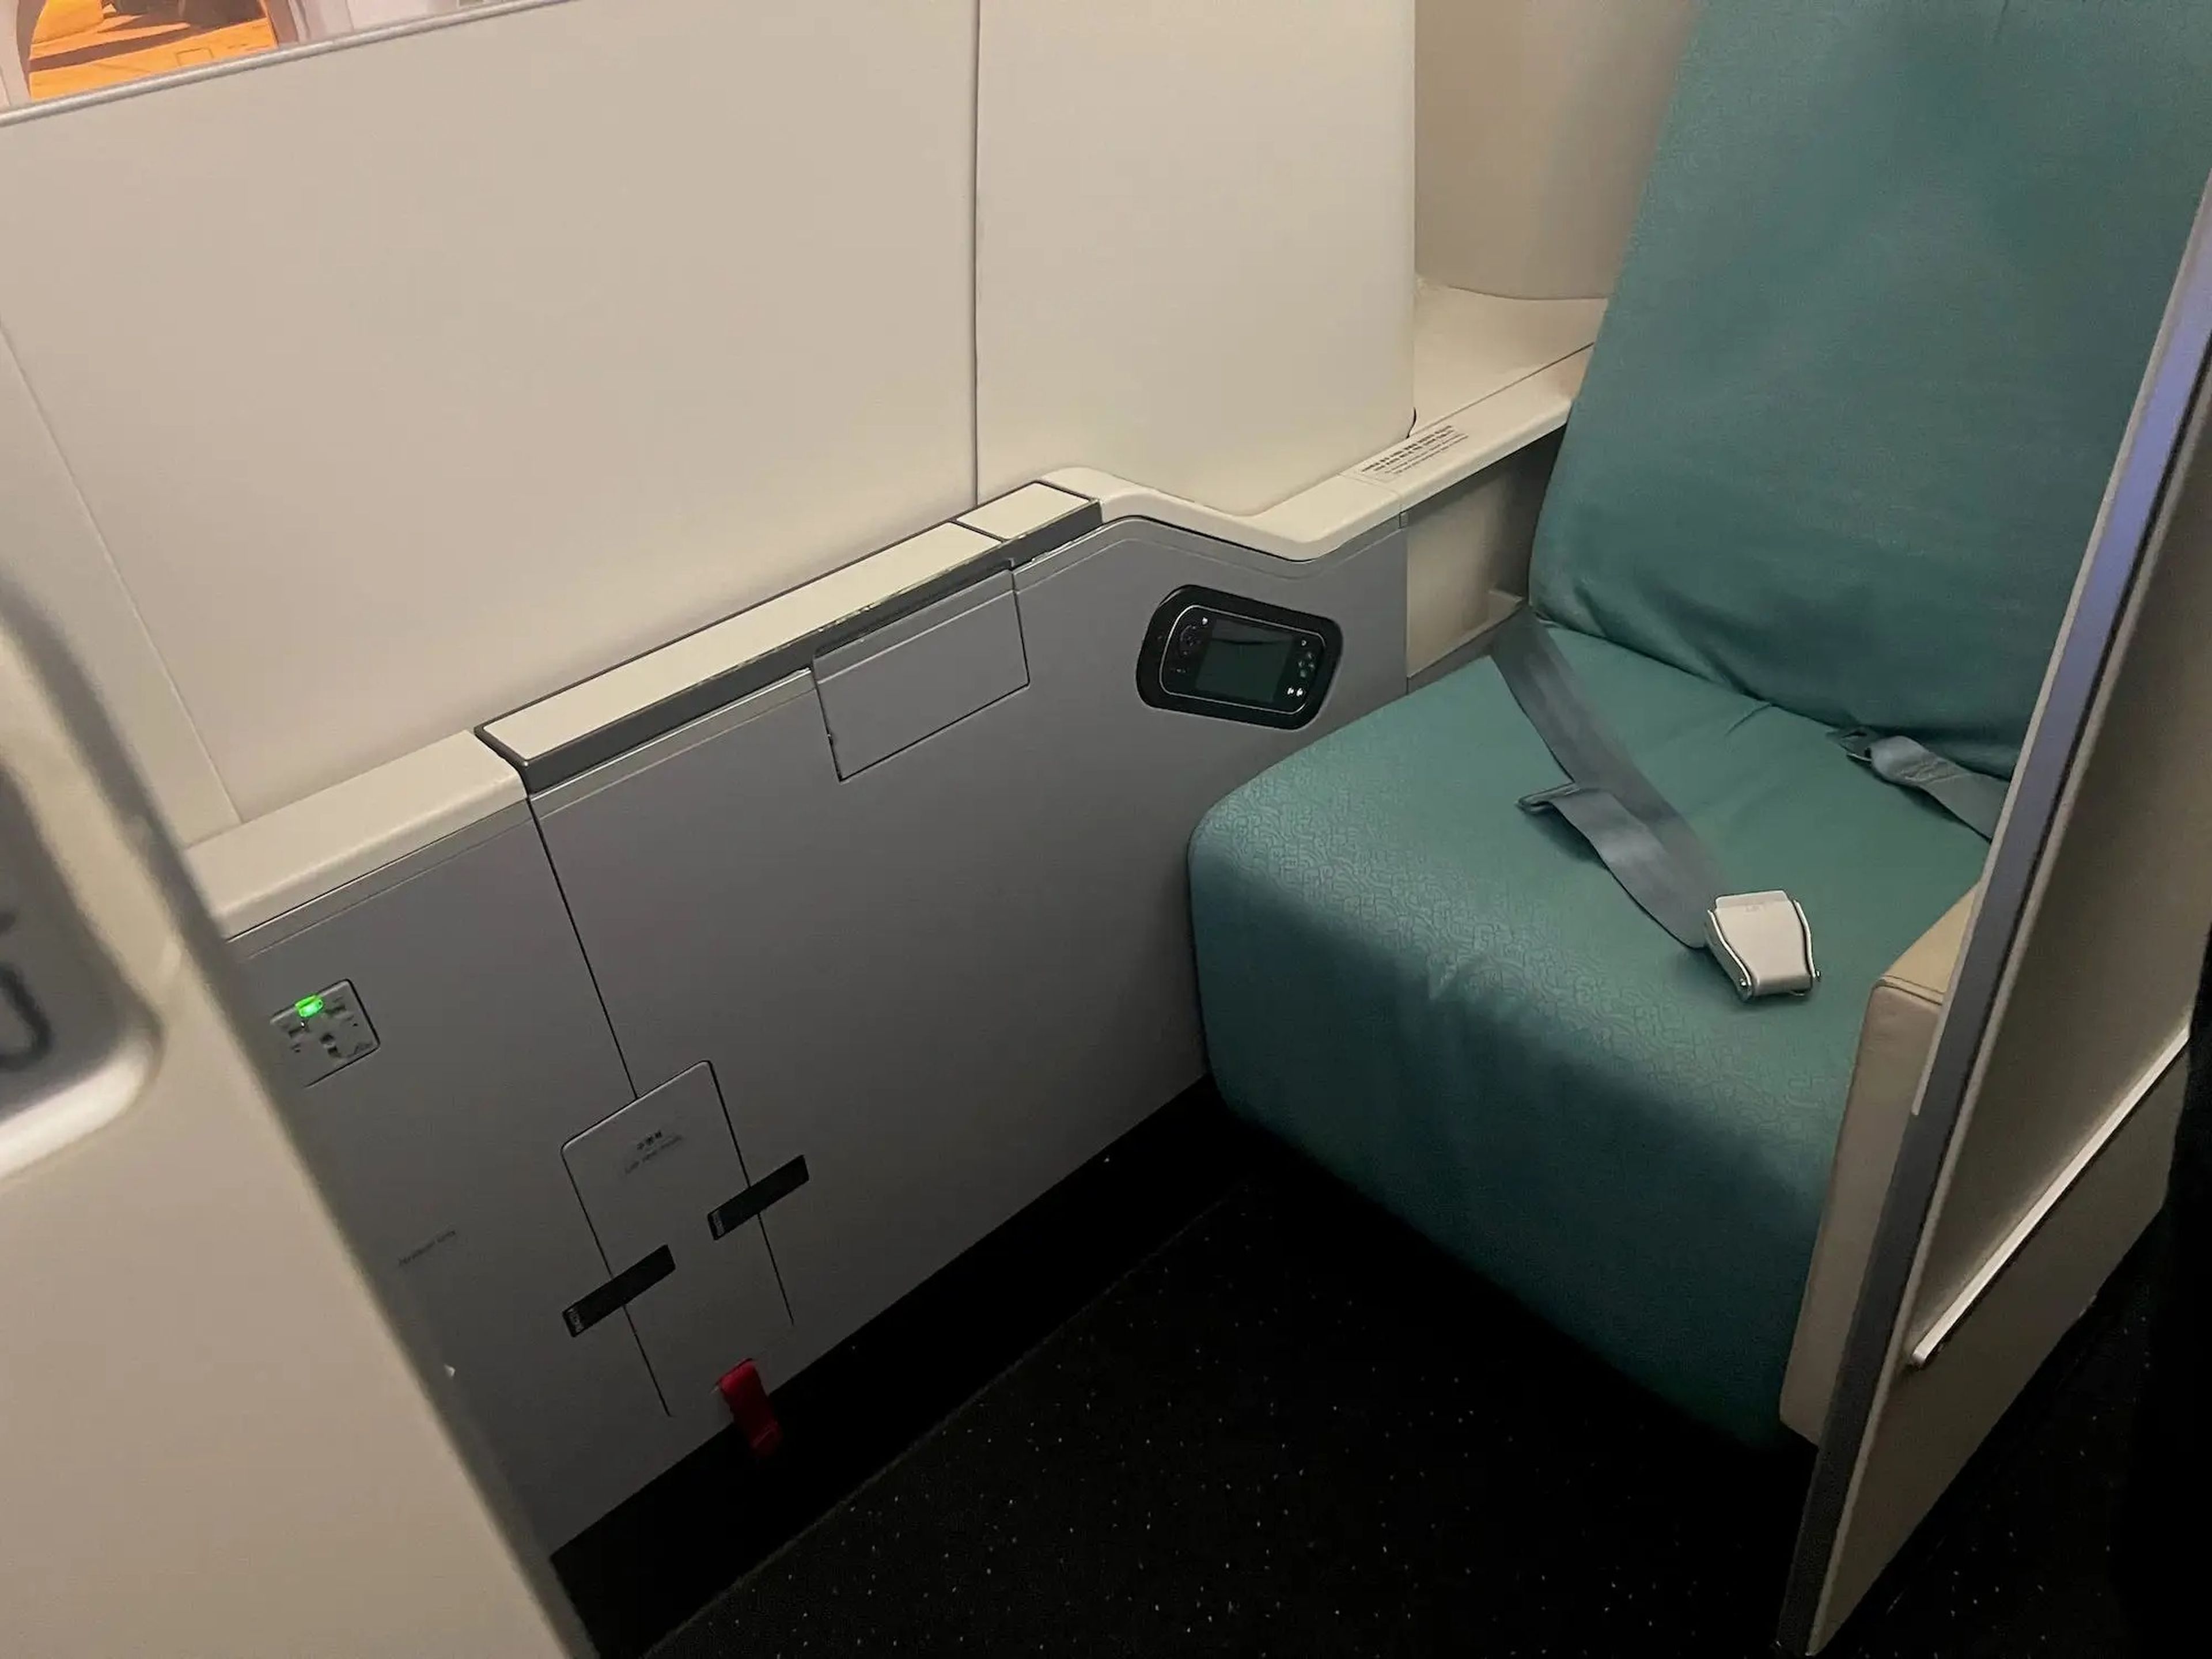 The aisle seat shows no door between the aisle and the seat.